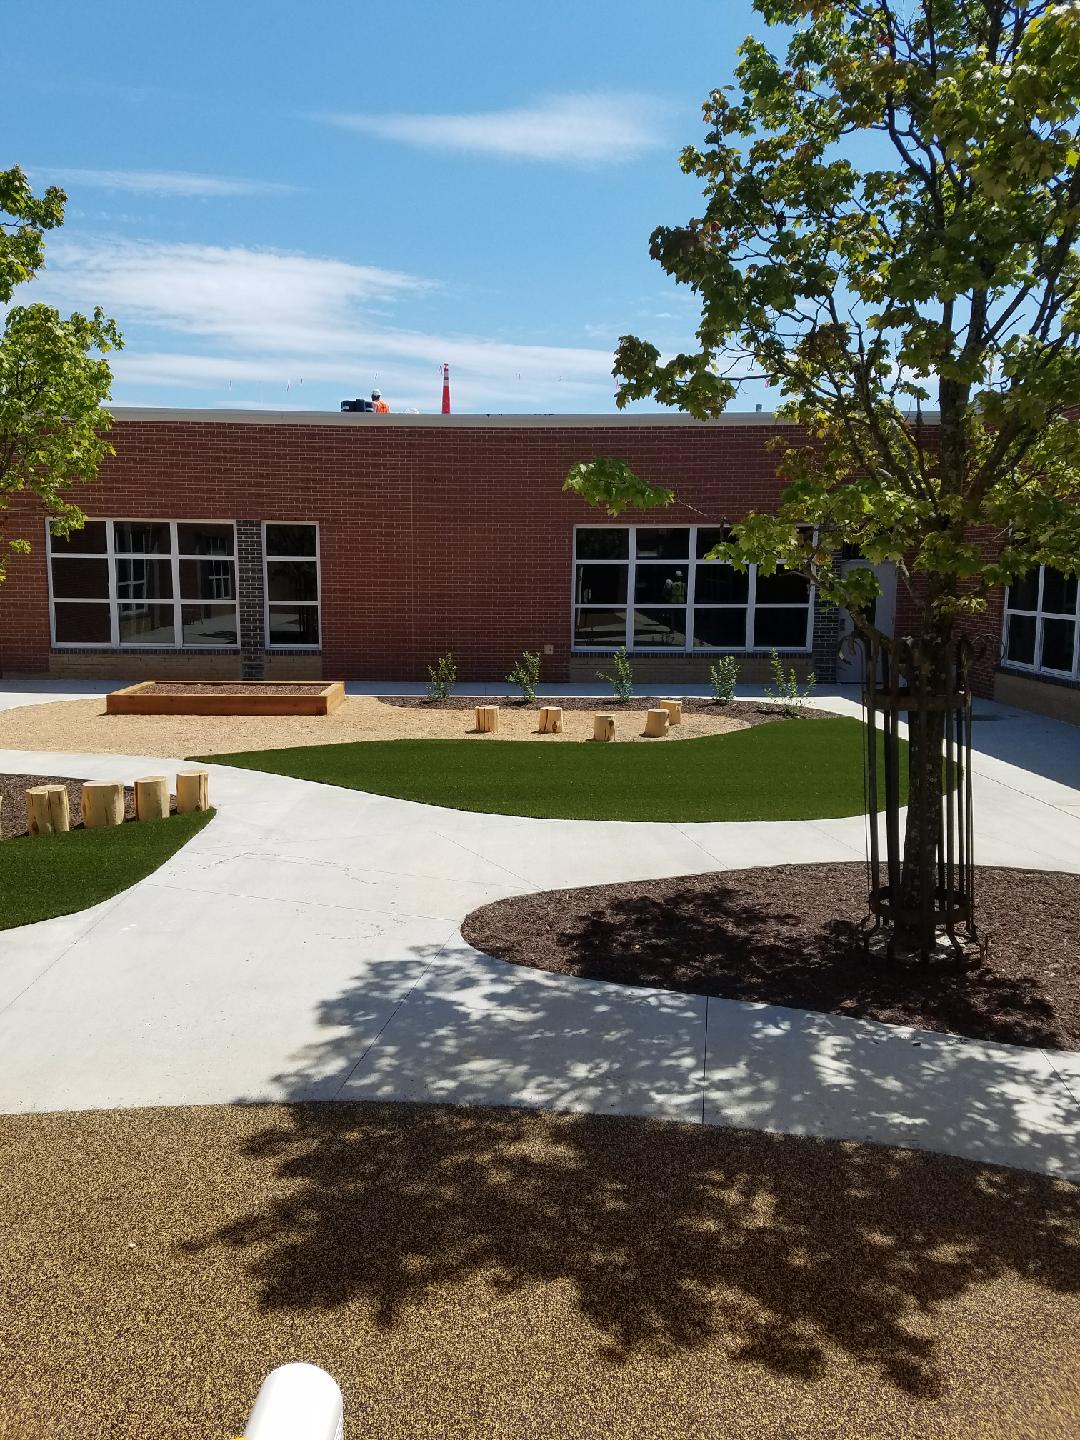 The image shows an outdoor courtyard with a brick building, green lawn areas, concrete walkways, wooden benches, and a growing tree. It's a sunny day.